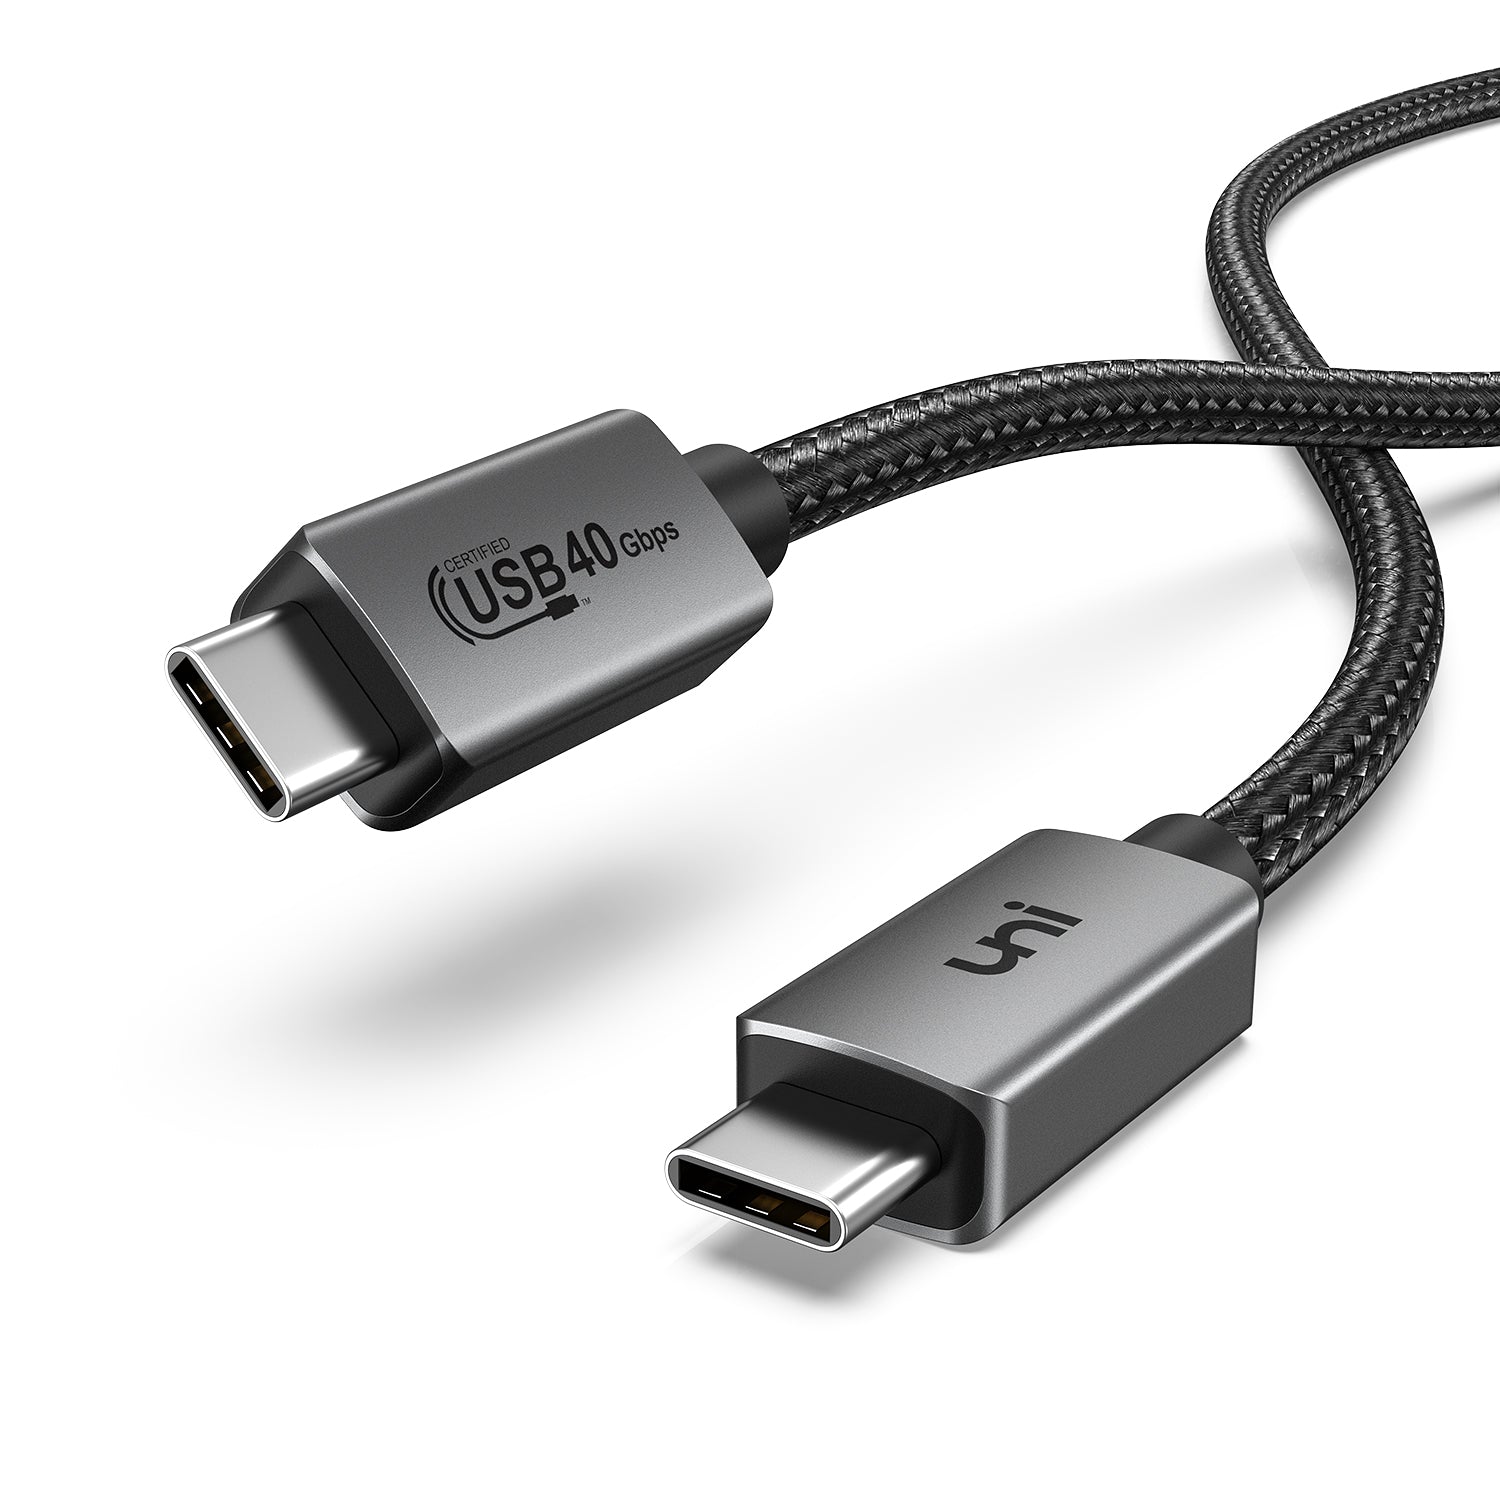 3ft (0.9m) USB 3.0 (USB 3.1 Gen 1) USB-C to USB-B Cable M/M - Black, USB-C  Cables, USB-C Cables, Adapters, and Hubs